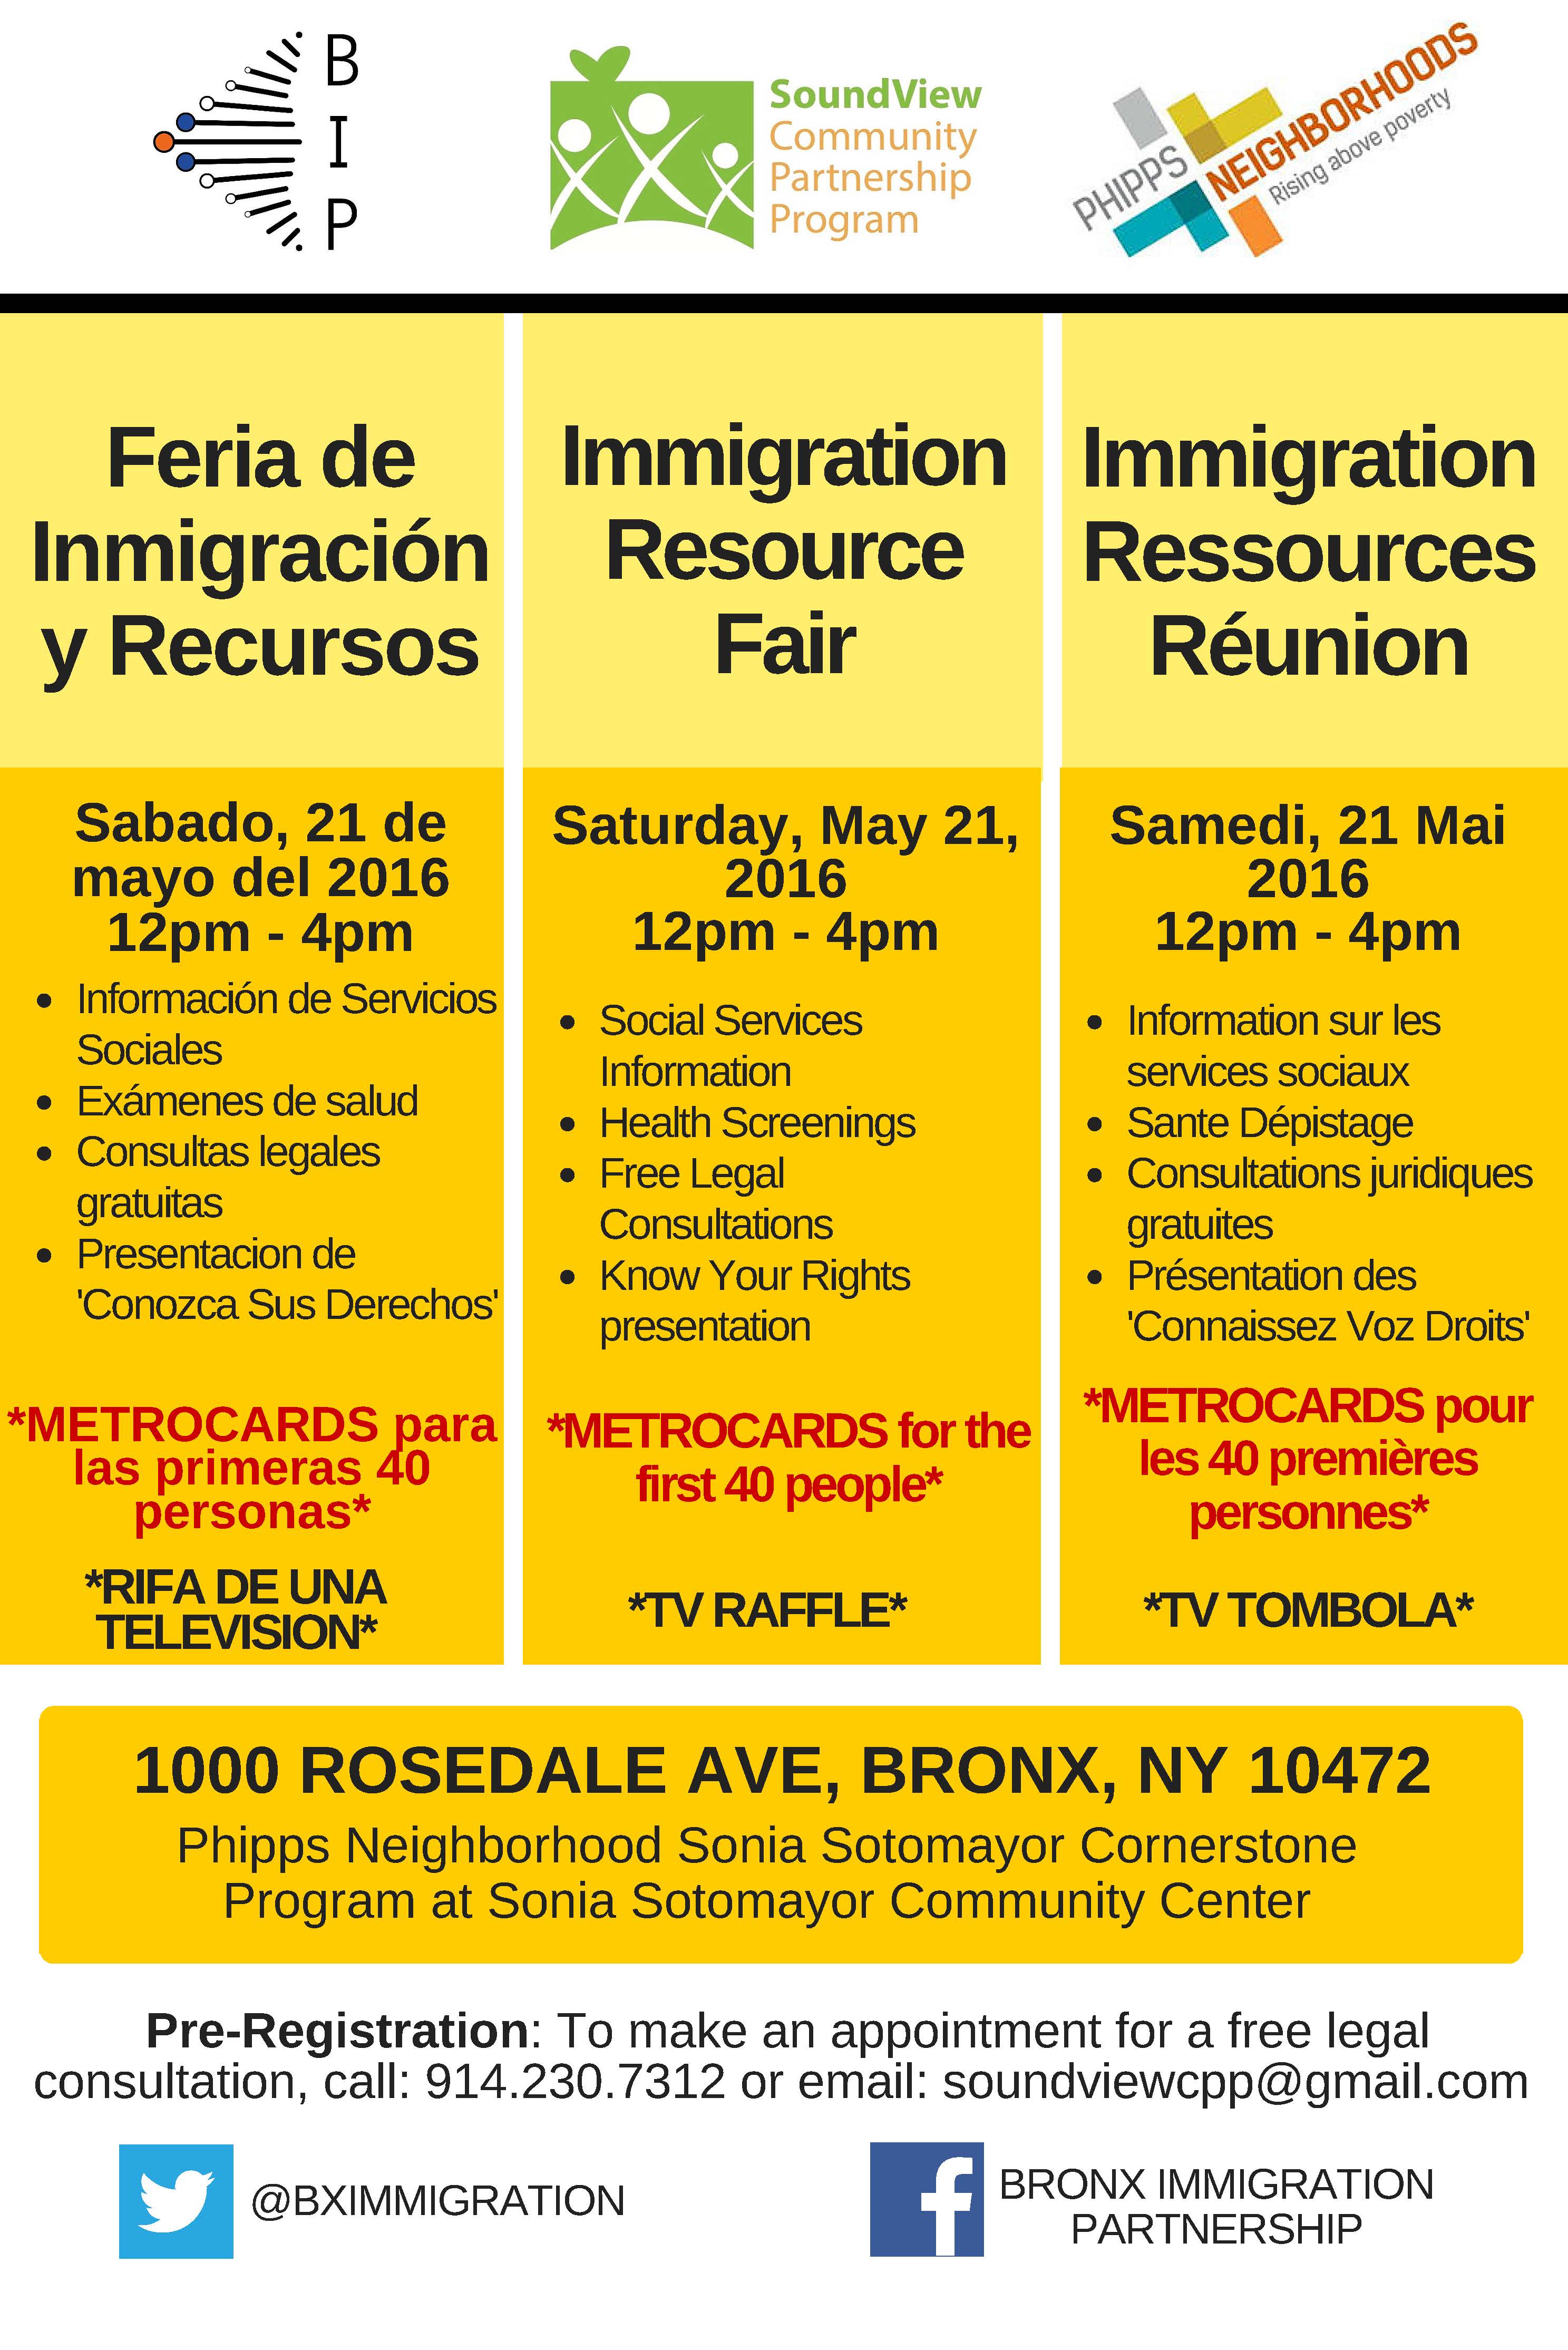 Immigration and Resource Fair